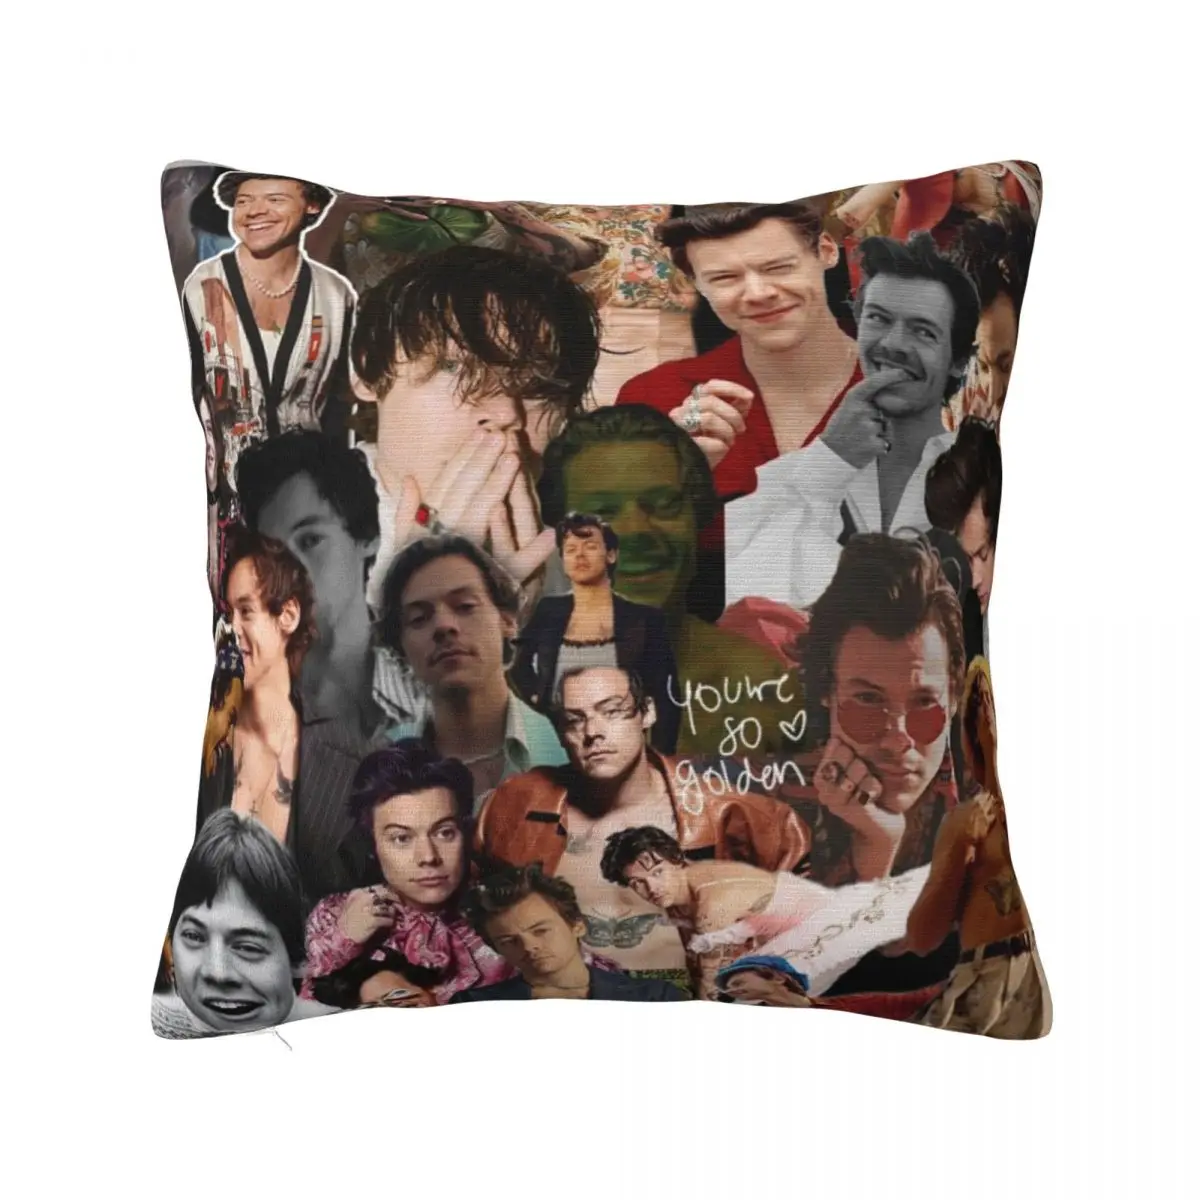 Harrys Pillowcase Printing Polyester Cushion Cover Decor Styles Throw Pillow Case Cover Home Square 40*40cm